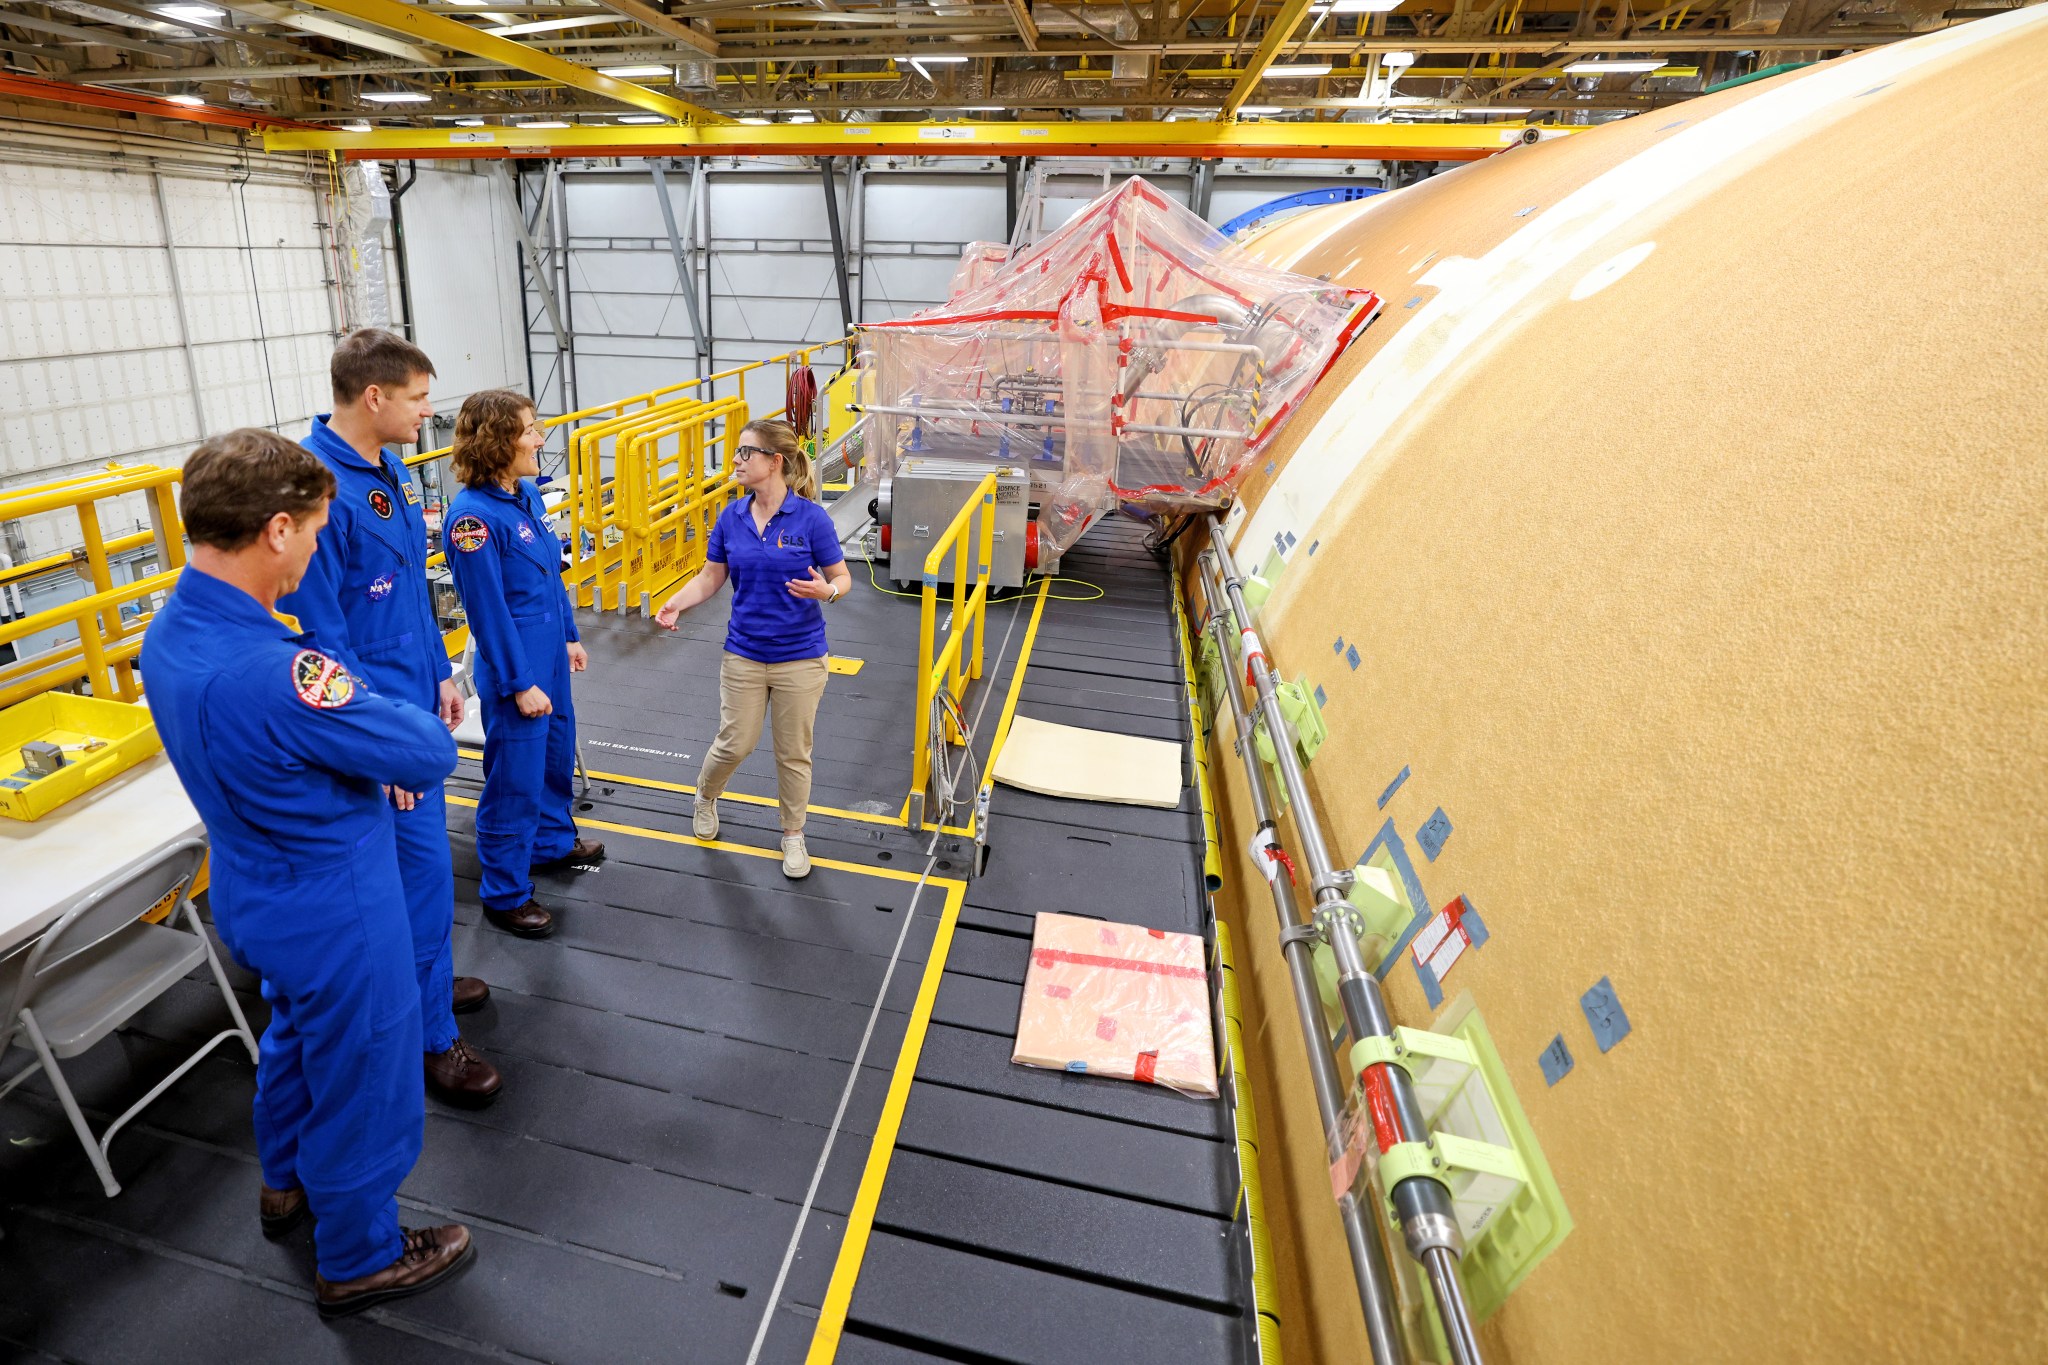 Artemis II NASA astronauts Reid Wiseman and Christina Koch of NASA, and CSA (Canadian Space Agency) astronaut Jeremy Hansen view the core stage for the SLS (Space Launch System) rocket at the agency’s Michoud Assembly Facility in New Orleans on Nov. 16.